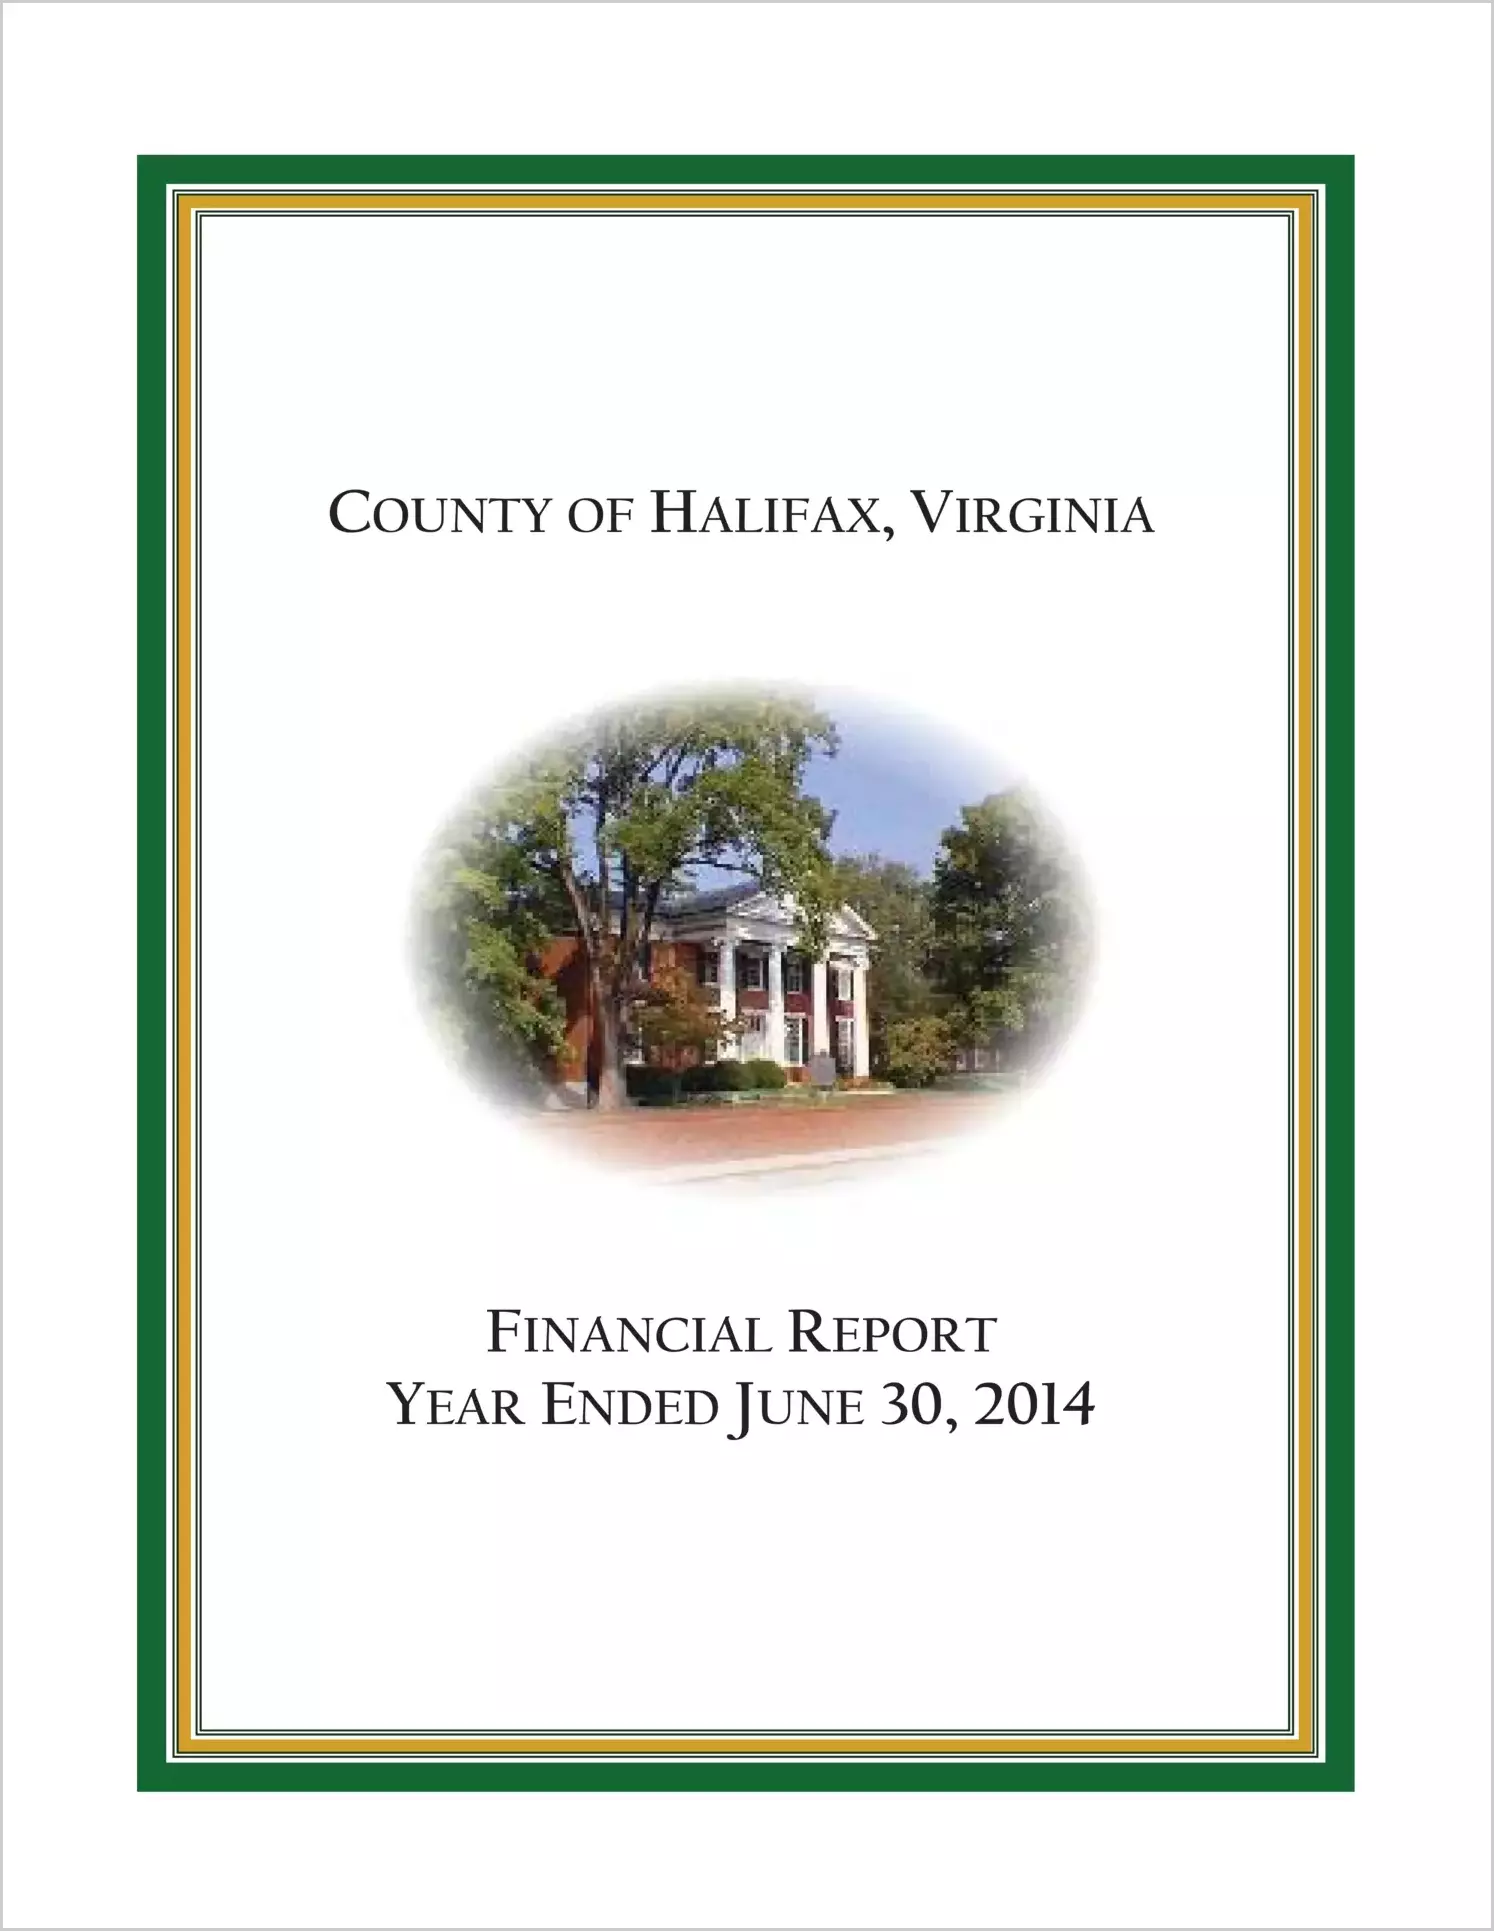 2014 Annual Financial Report for County of Halifax